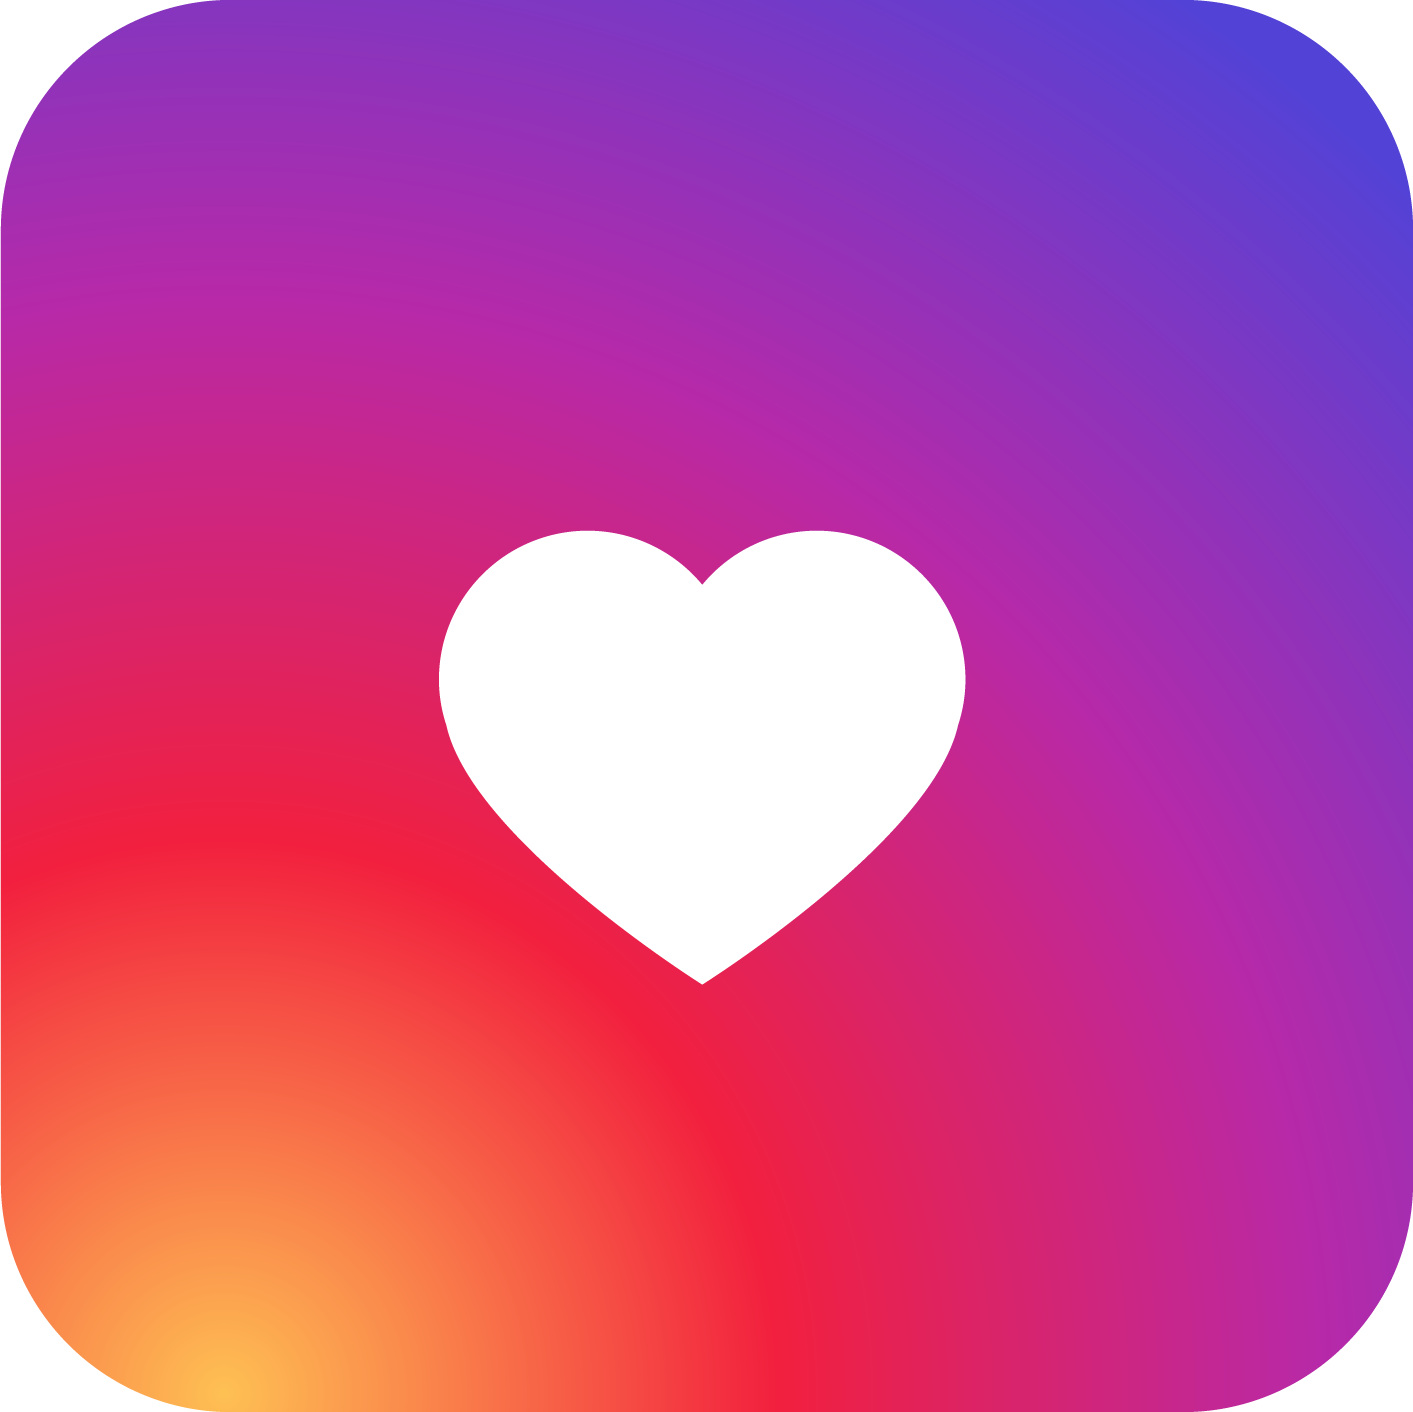 Heart Instagram Free Photo PNG PNG Image